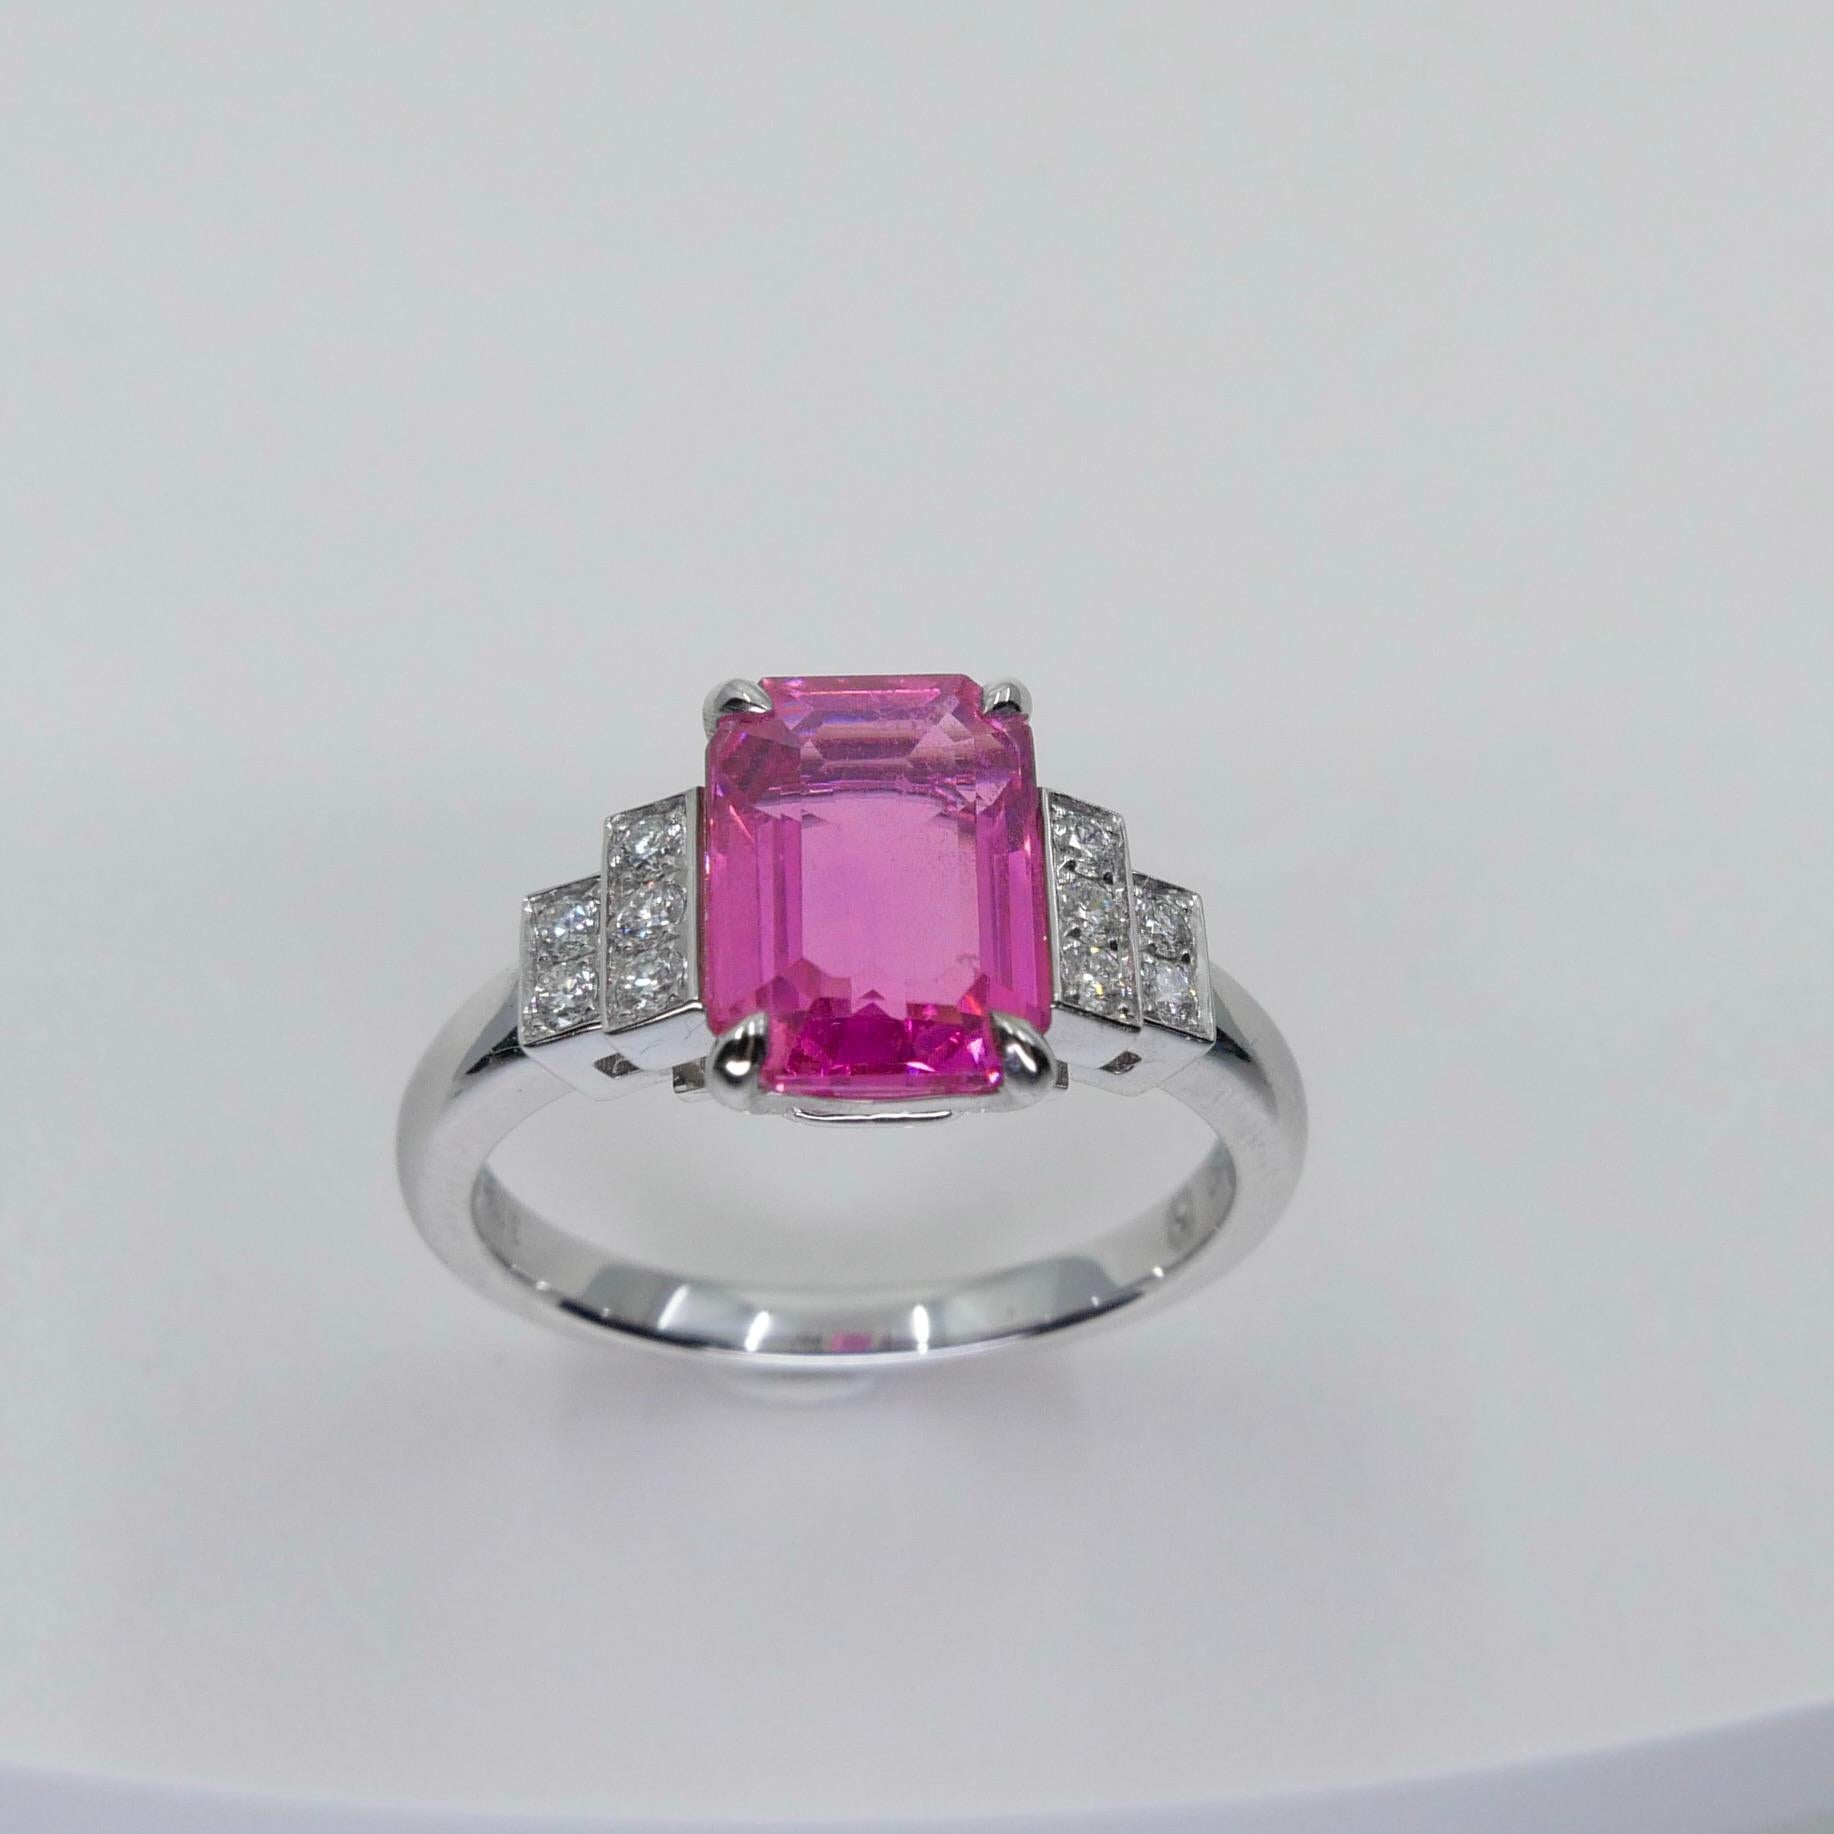 GRS Certified 3.11 Cts No Heat Pink Sapphire & Diamond Ring. Art Deco Style 2